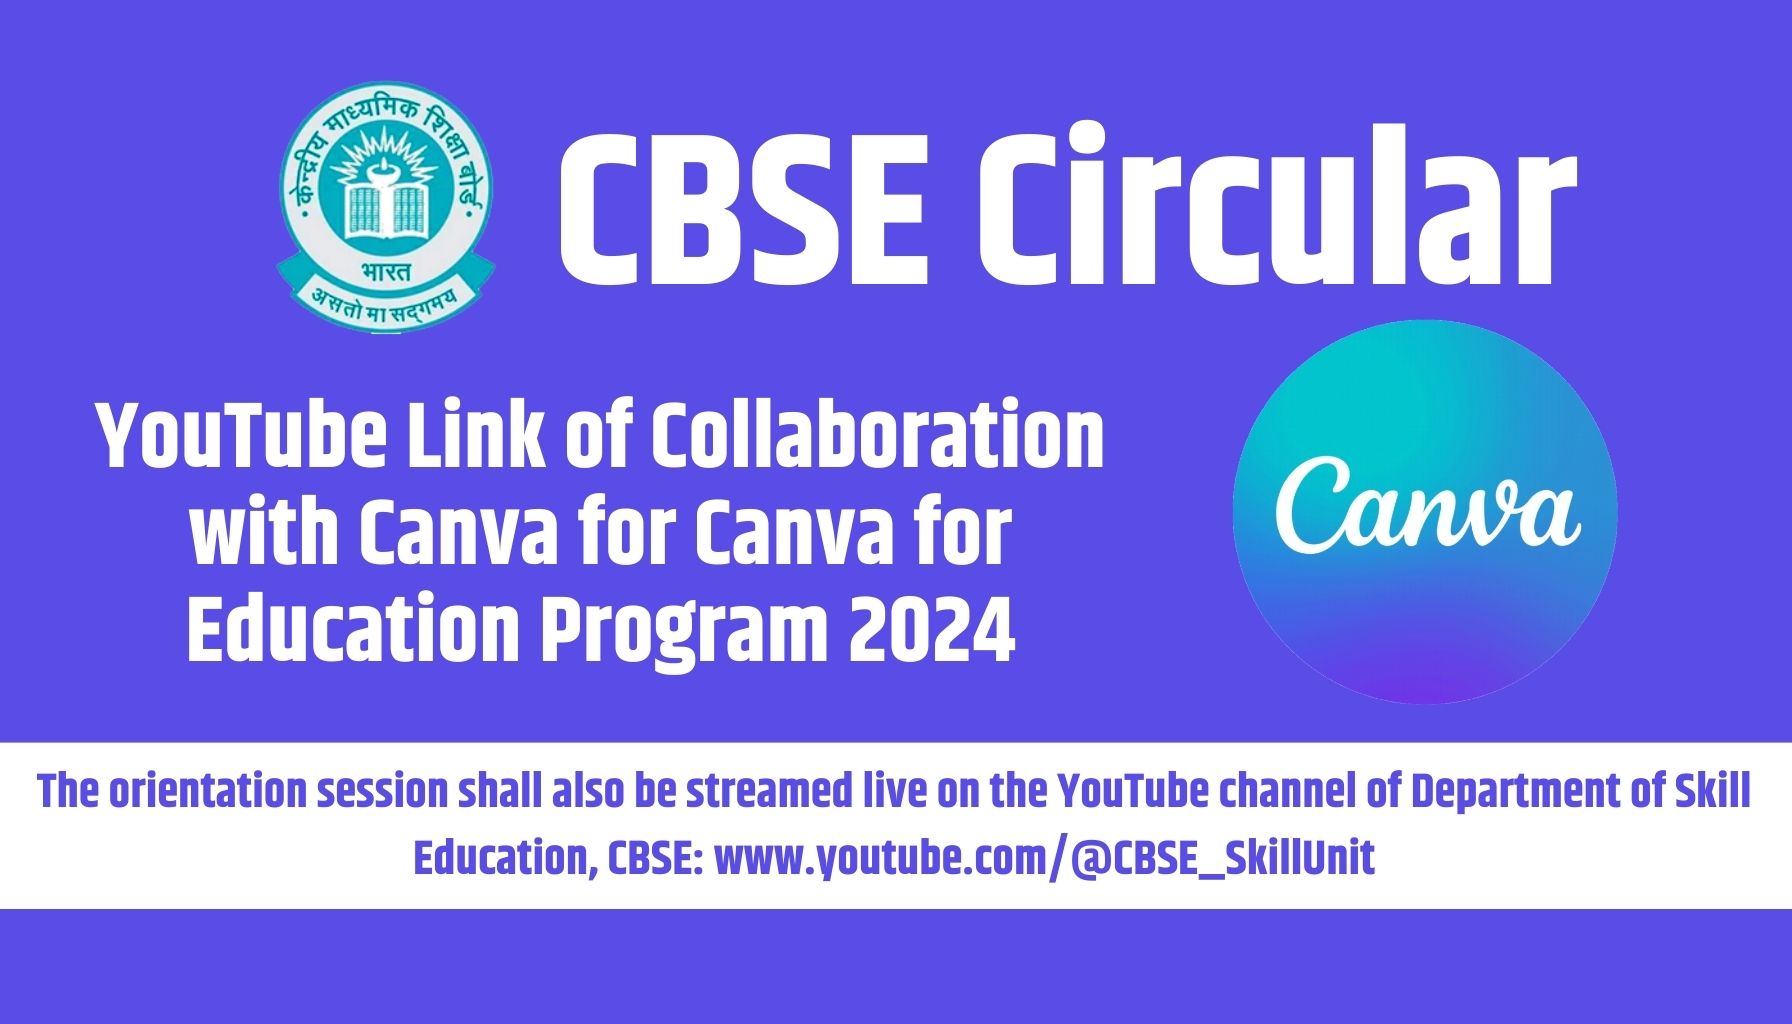 Live Link Collaboration with Canva for Education Program 2024